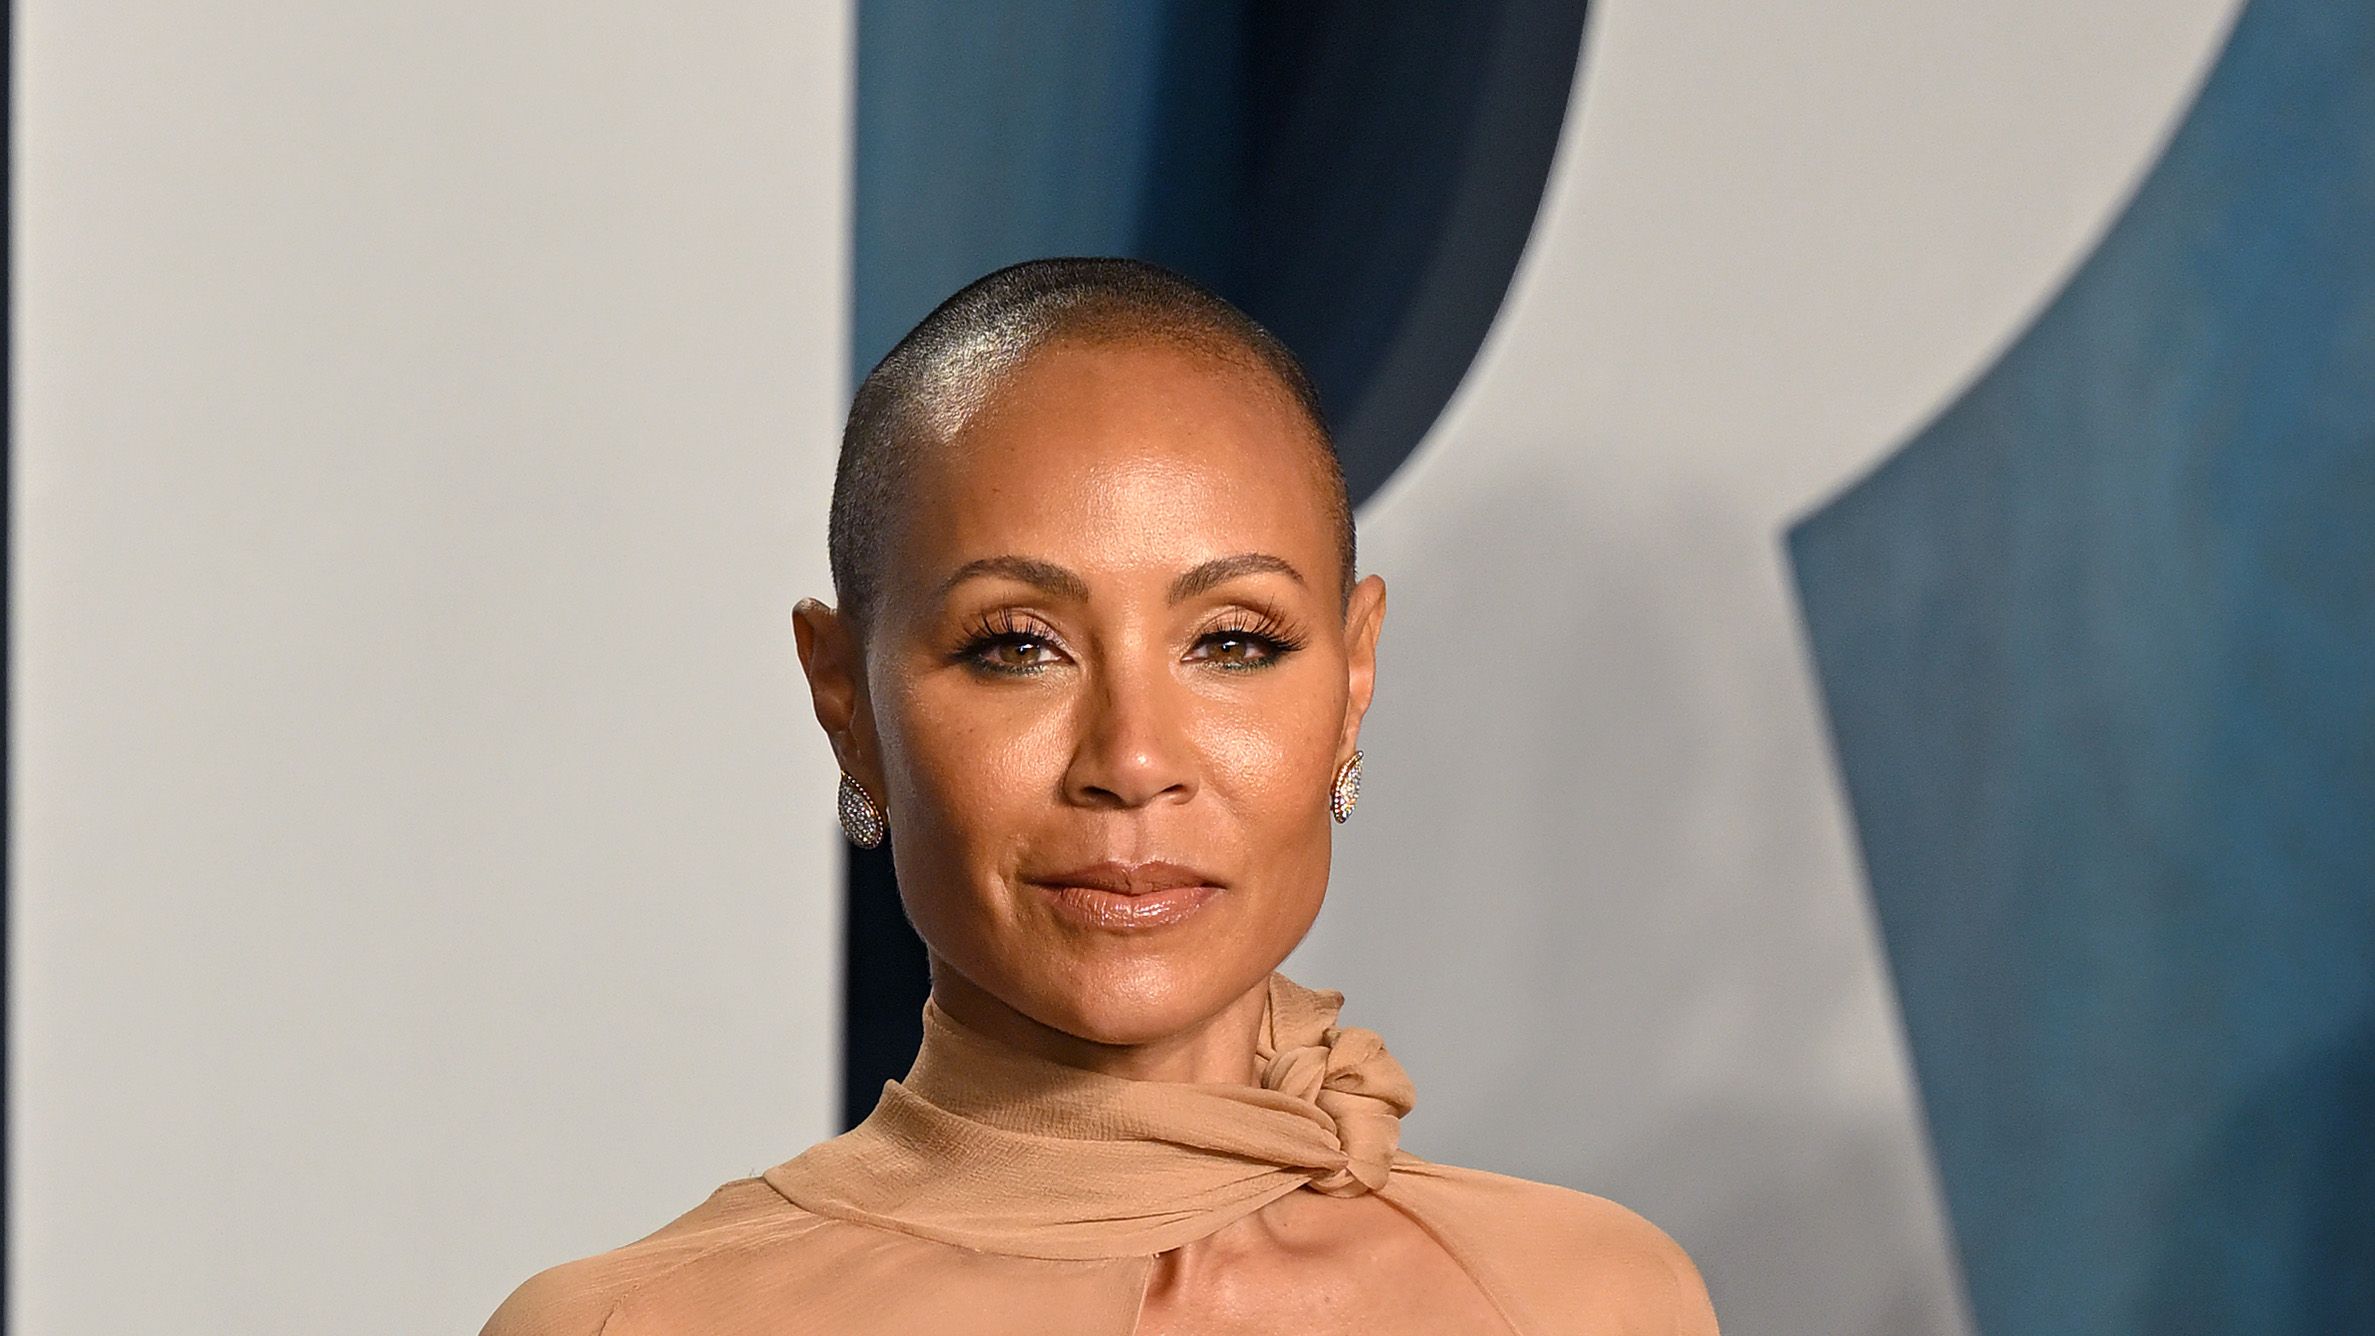 Jada Pinkett Smith opens up about her alopecia and hair loss